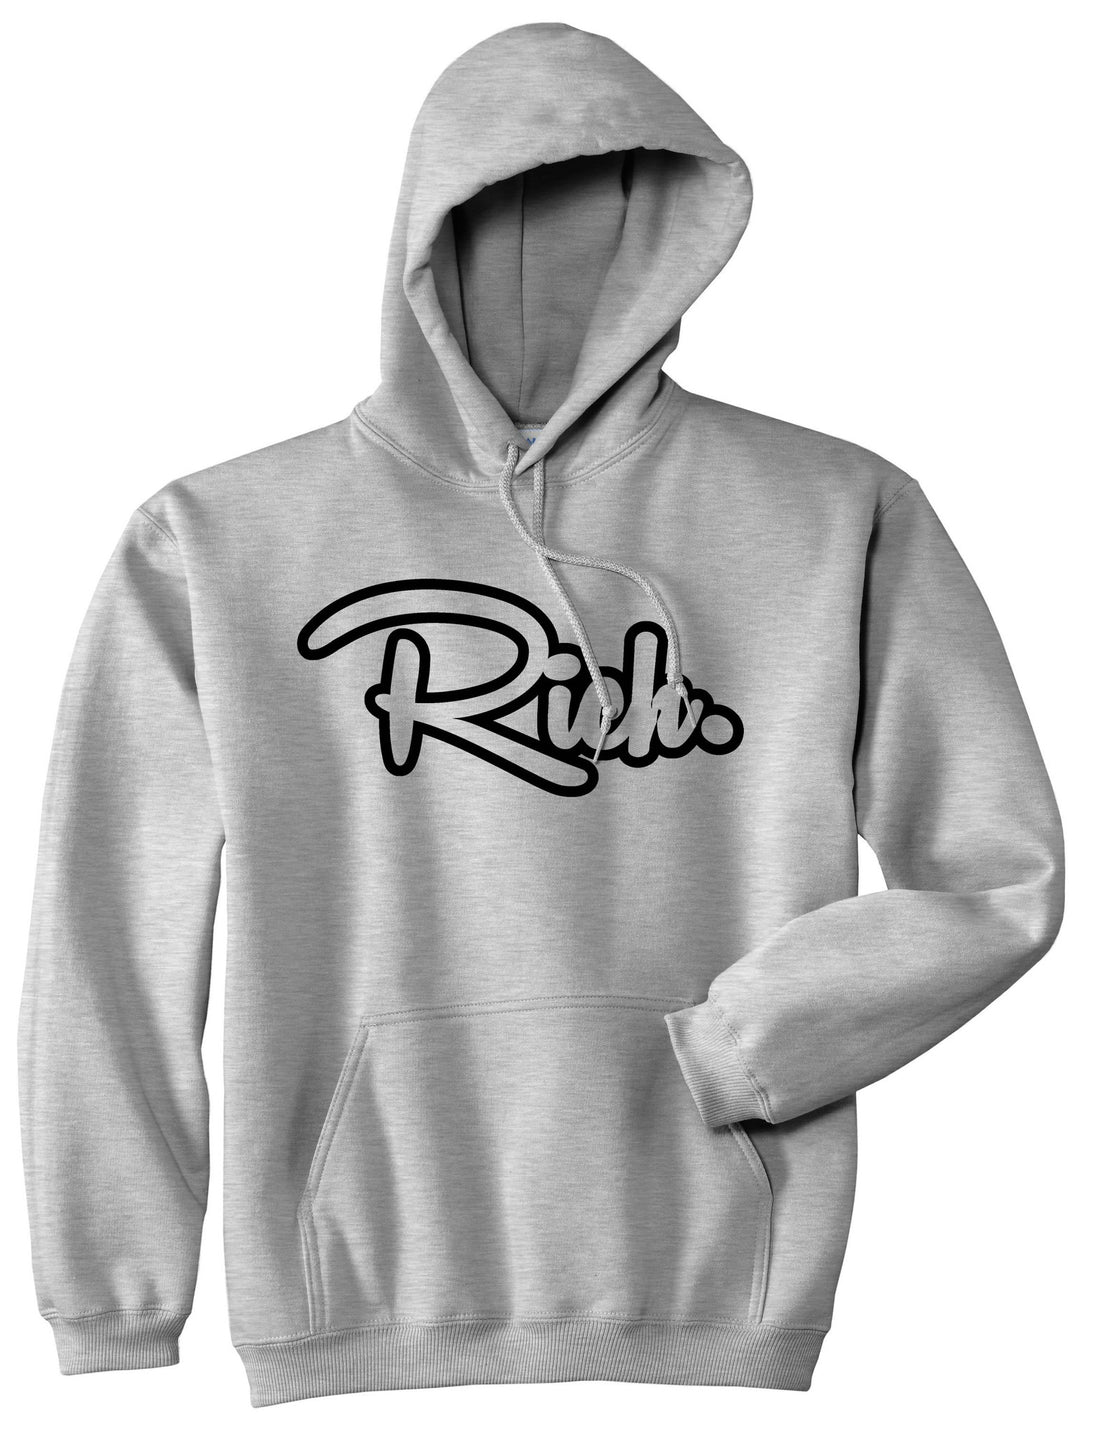 Rich Money Fab Style New York Richie NYC Boys Kids Pullover Hoodie Hoody In Grey by Kings Of NY